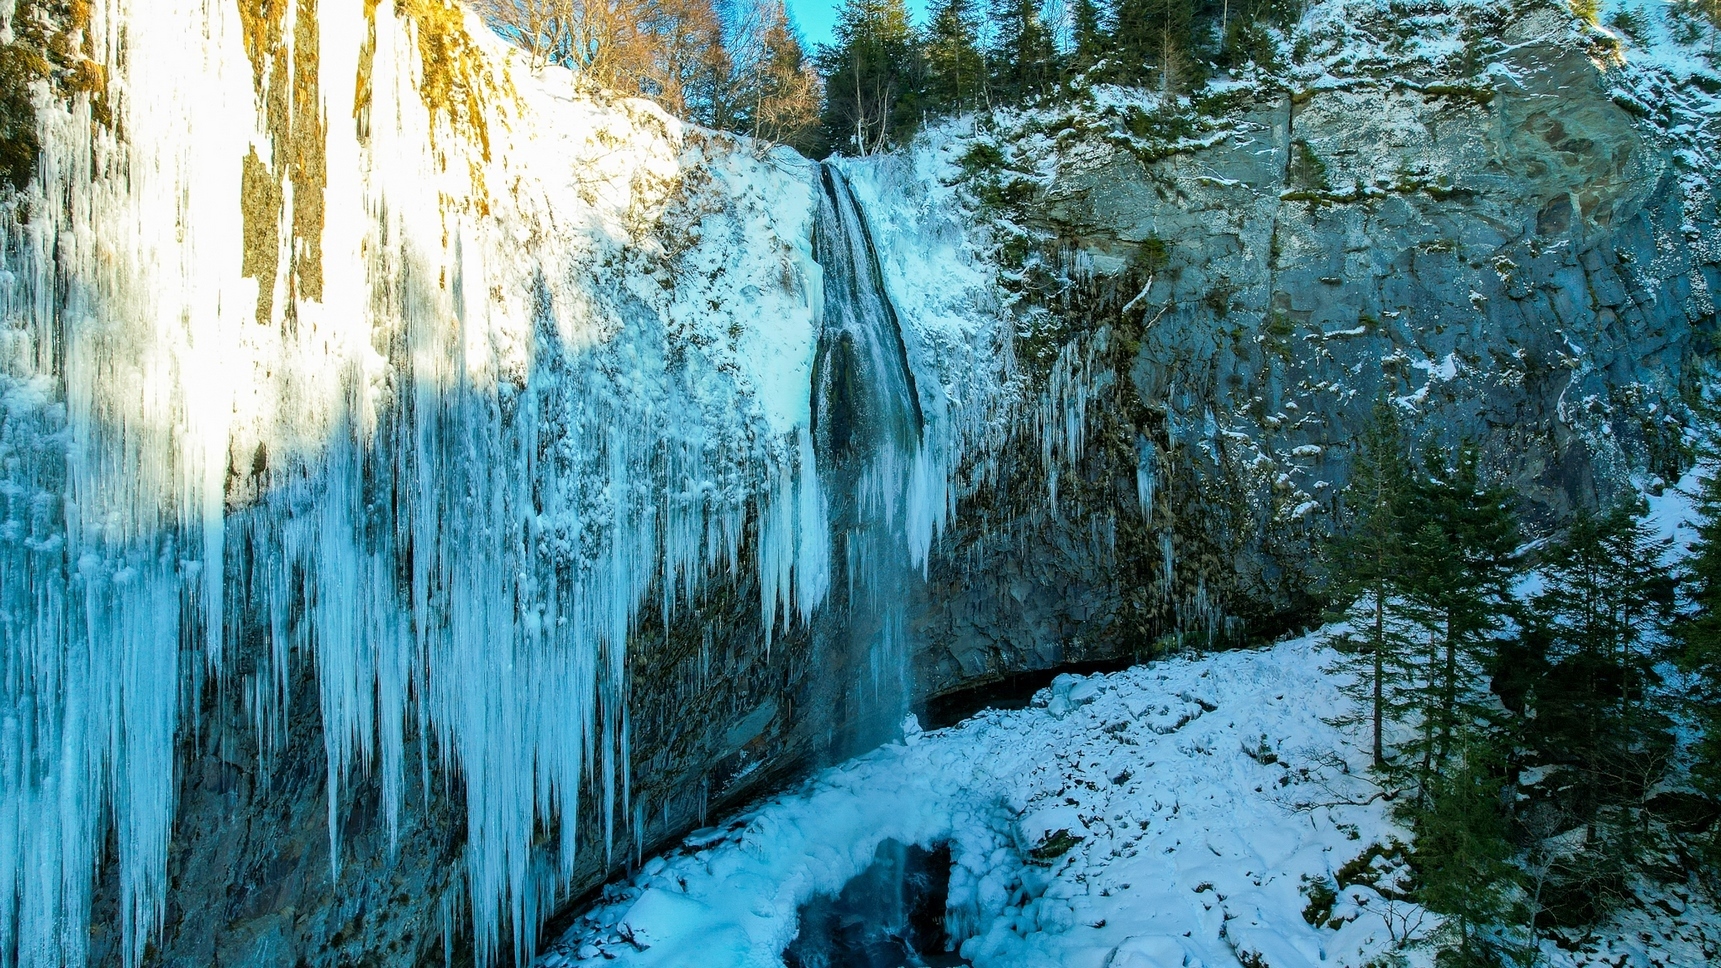 Discover the Grand Cascade covered in ice in winter